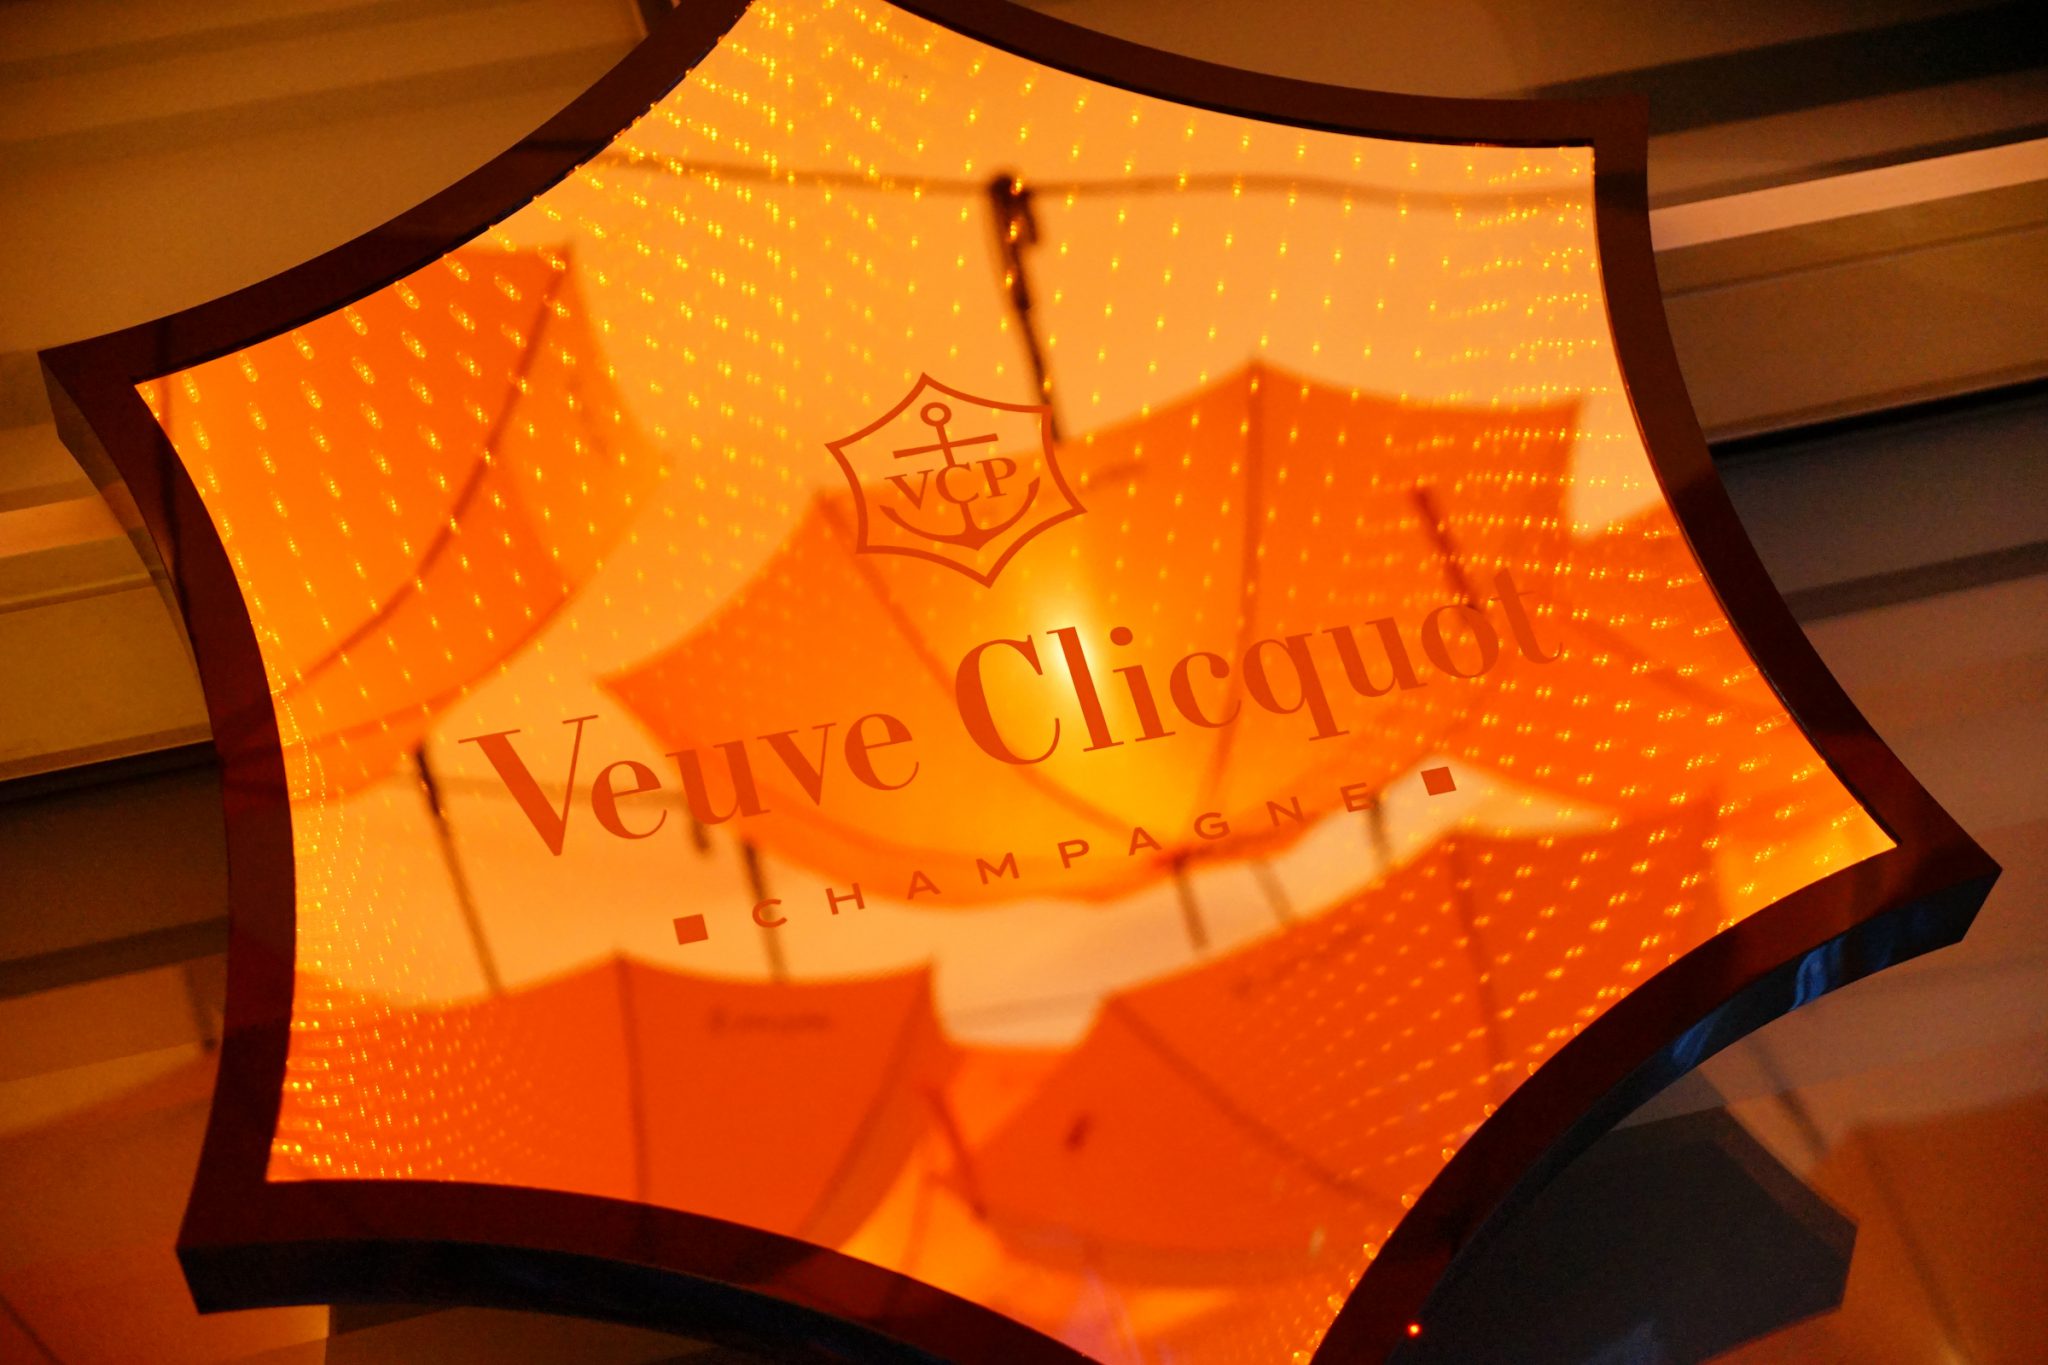 MEXICO CITY’S NEWEST HOT SPOT, THE MADAME CLICQUOT BAR